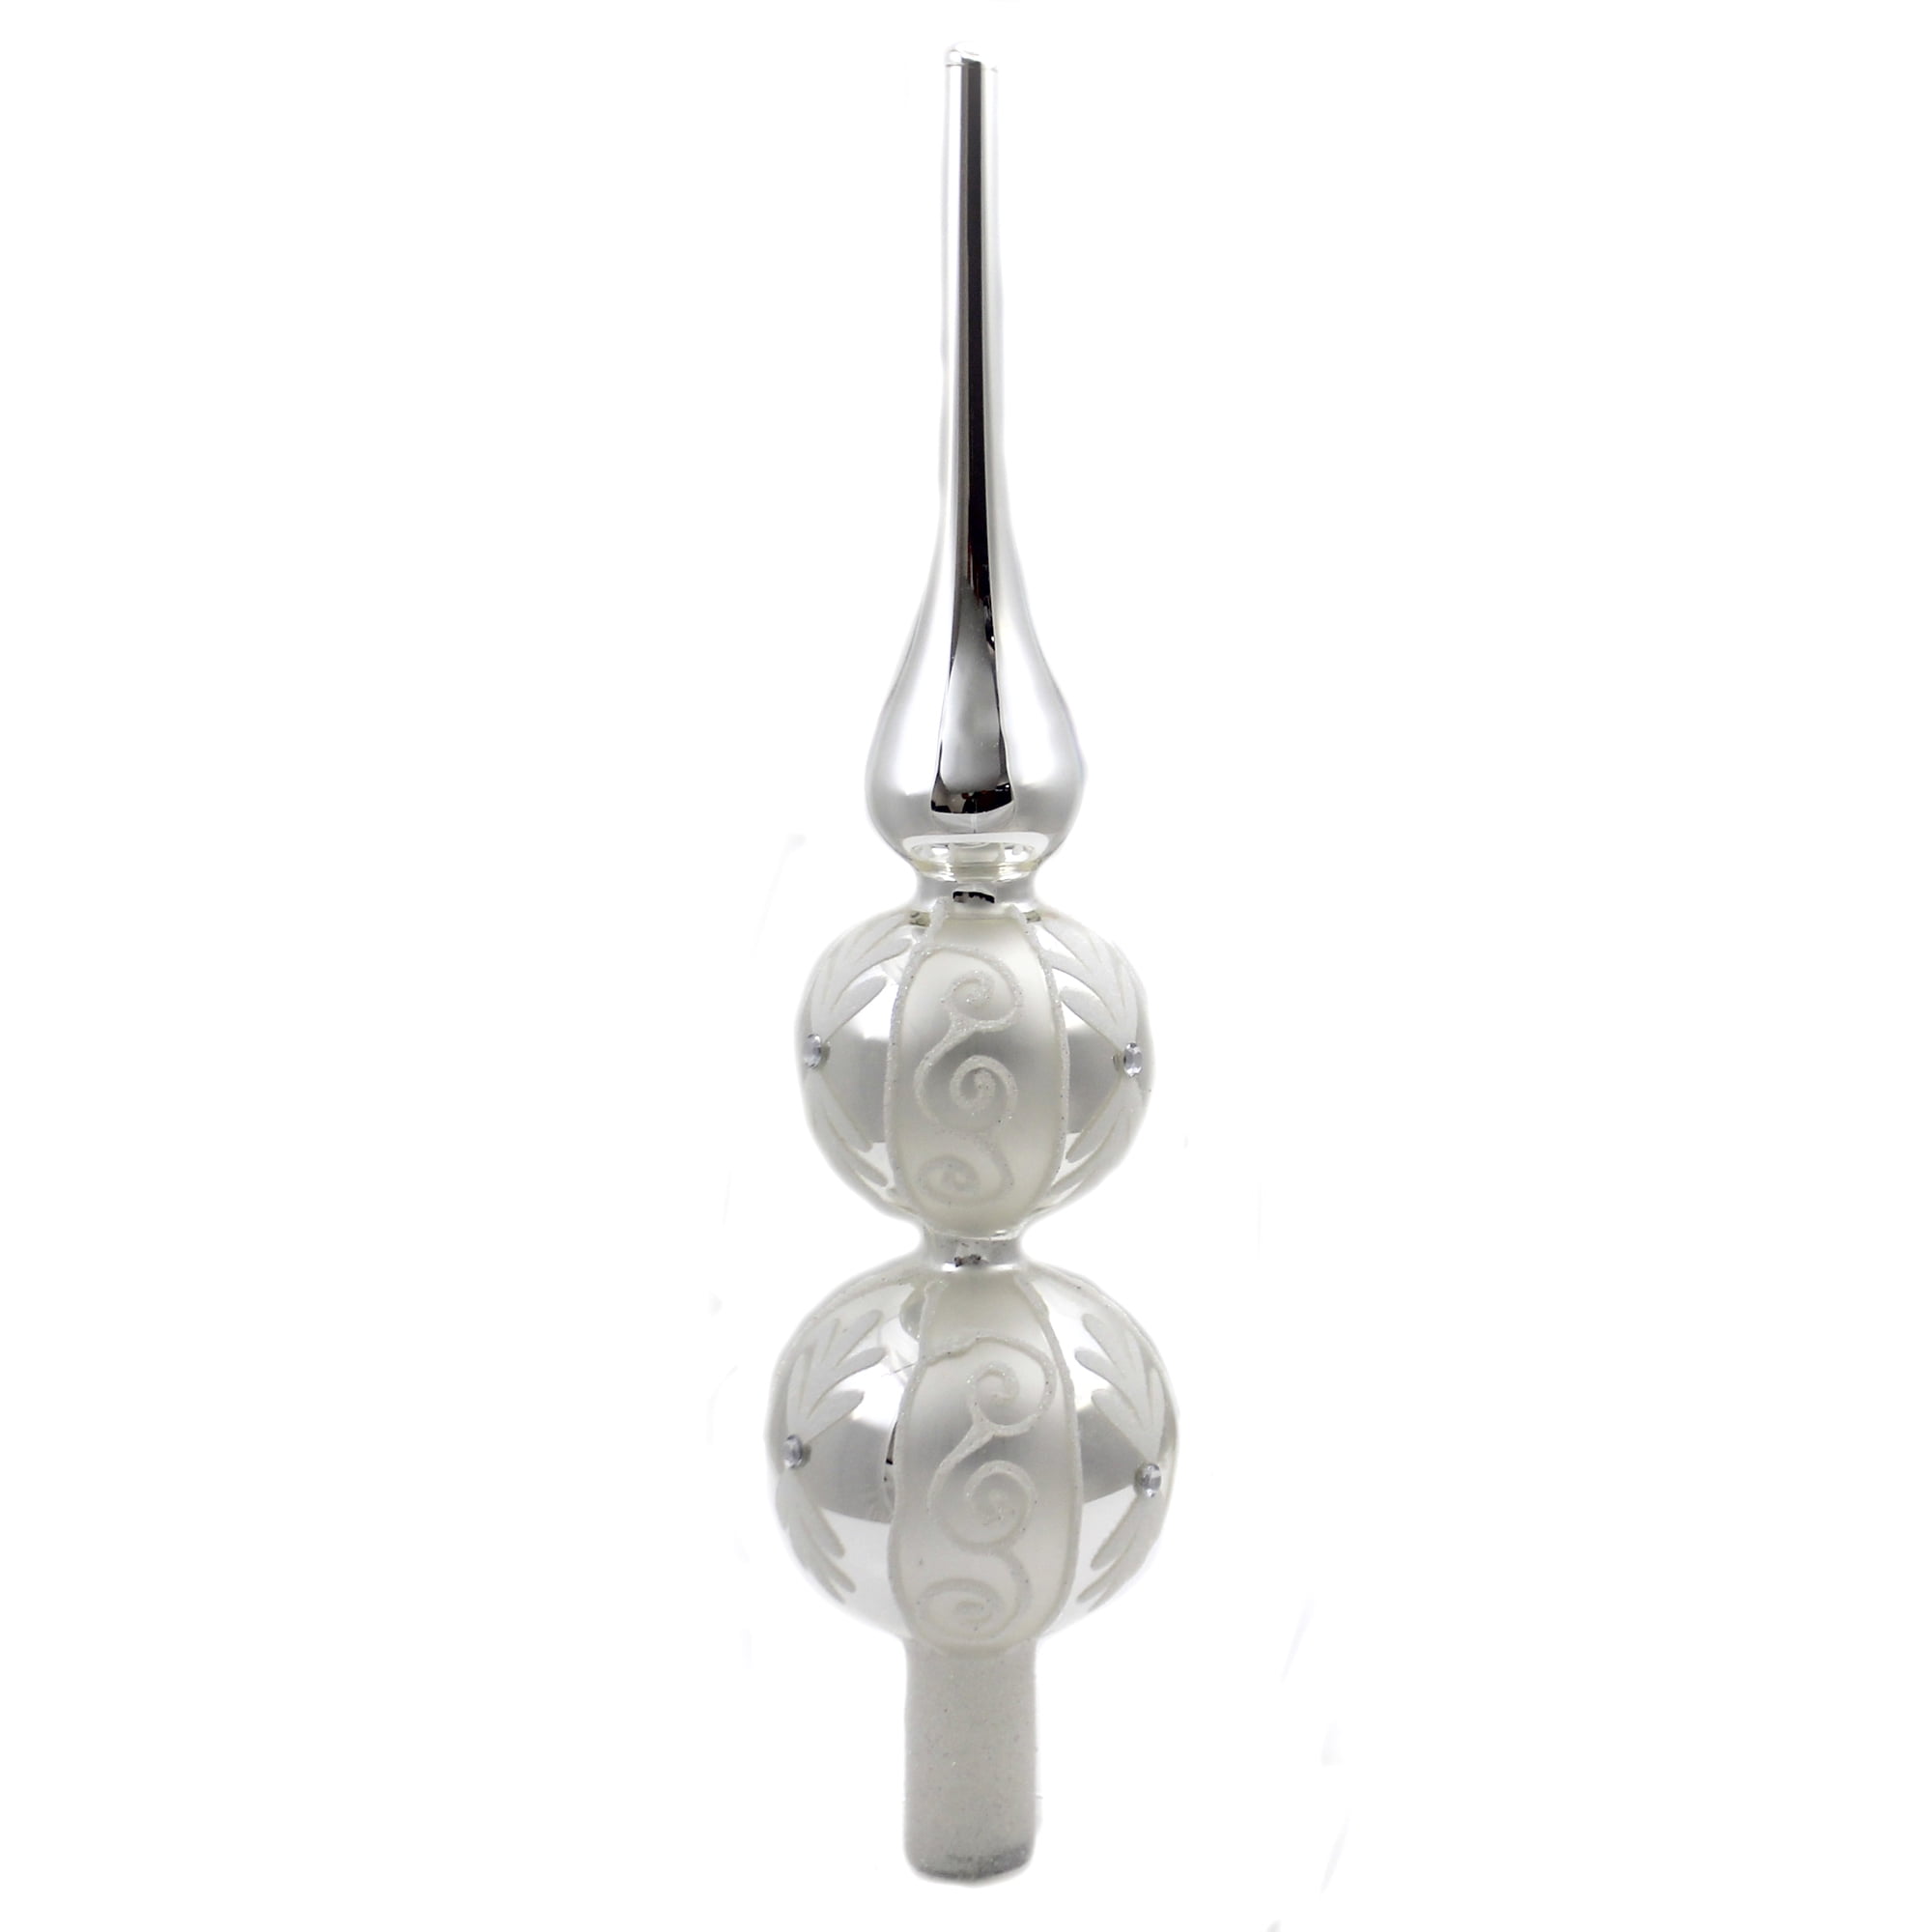 Moske tale Illusion Tree Topper Finial Decorated Tree Topper Three Tiered Christmas Gg0370  Silver - Walmart.com